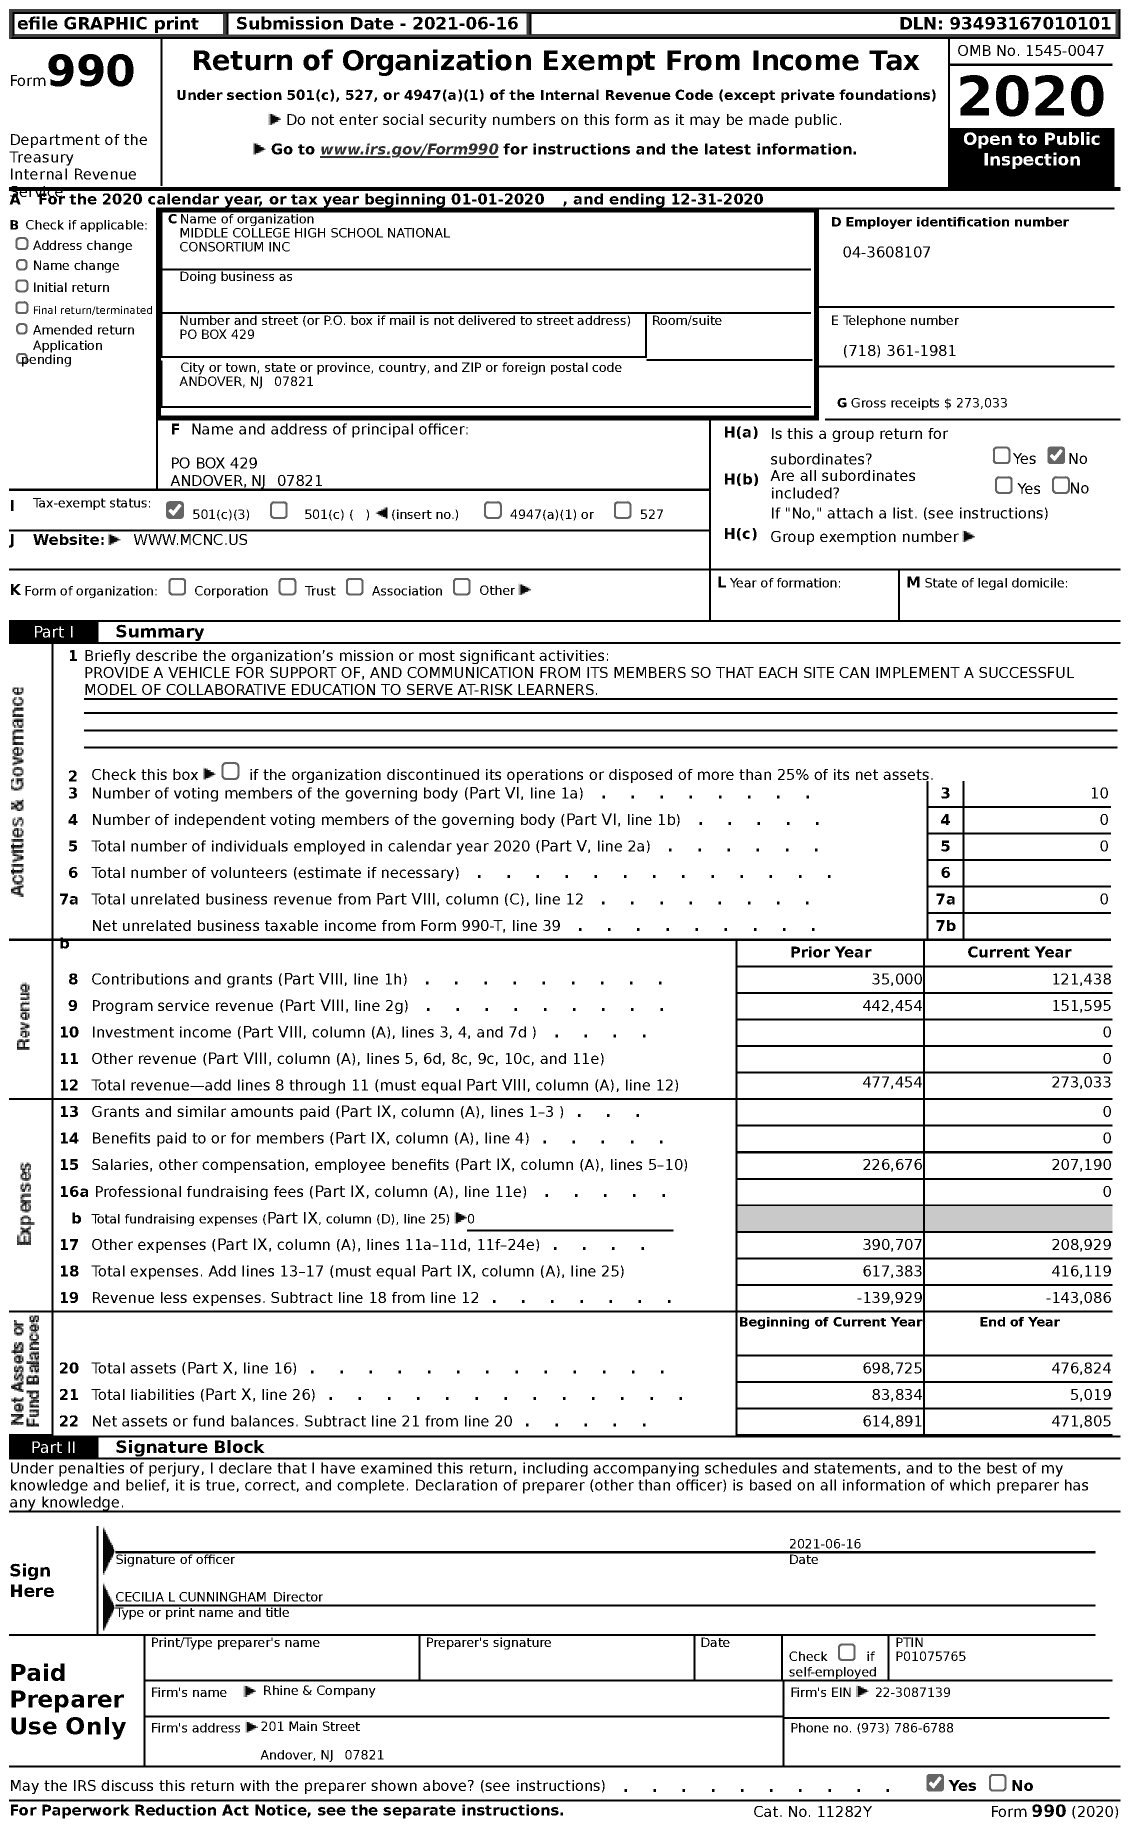 Image of first page of 2020 Form 990 for Middle College National Consortium (MCNC)